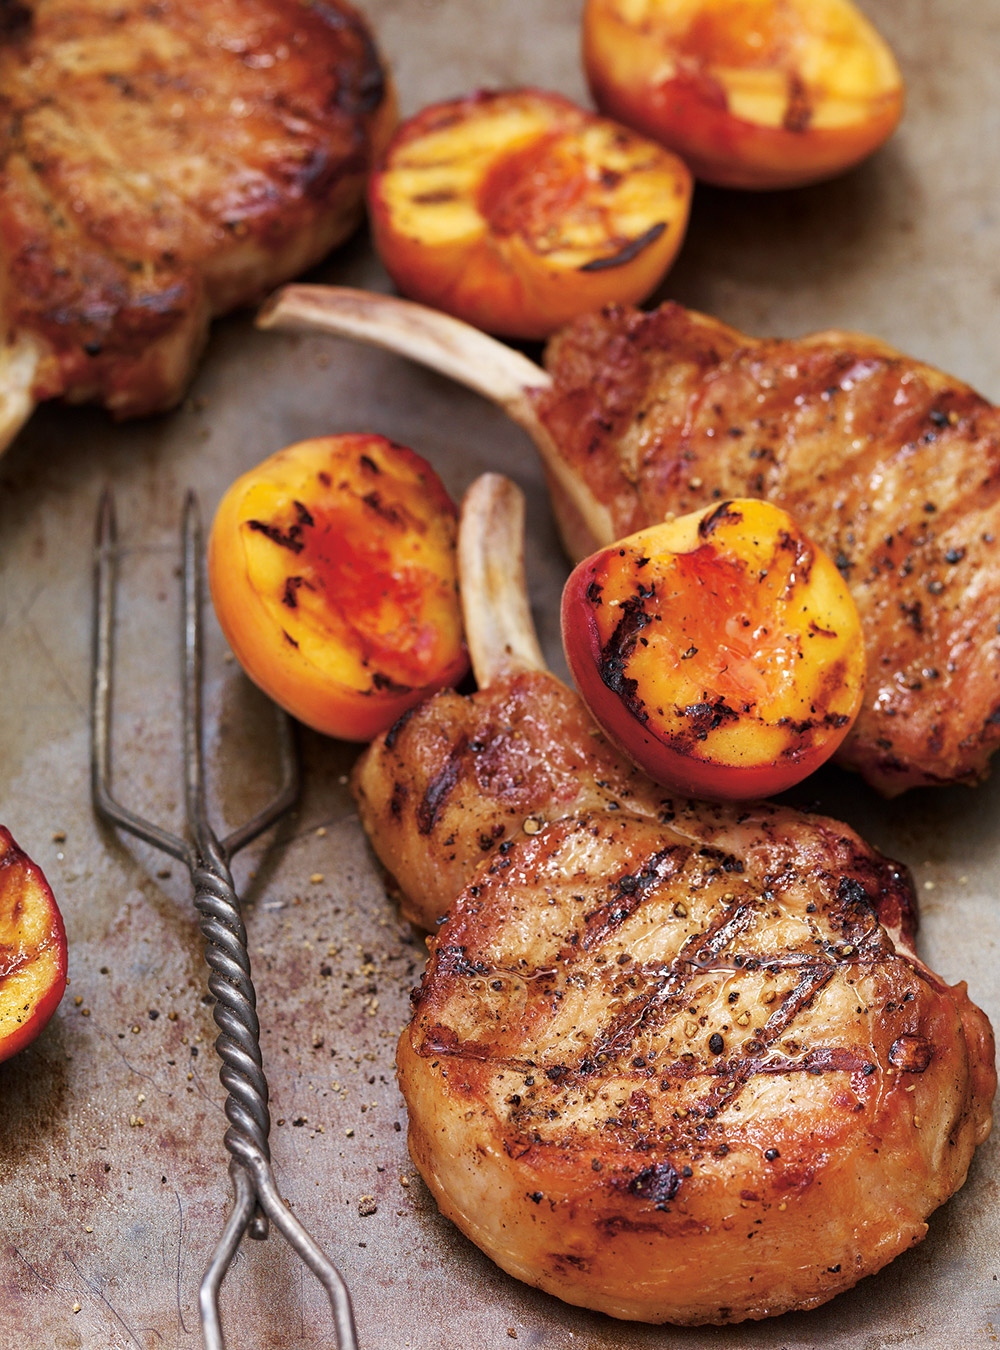 Grilled Pork Chops with Herbed Cheese and Grilled Peaches